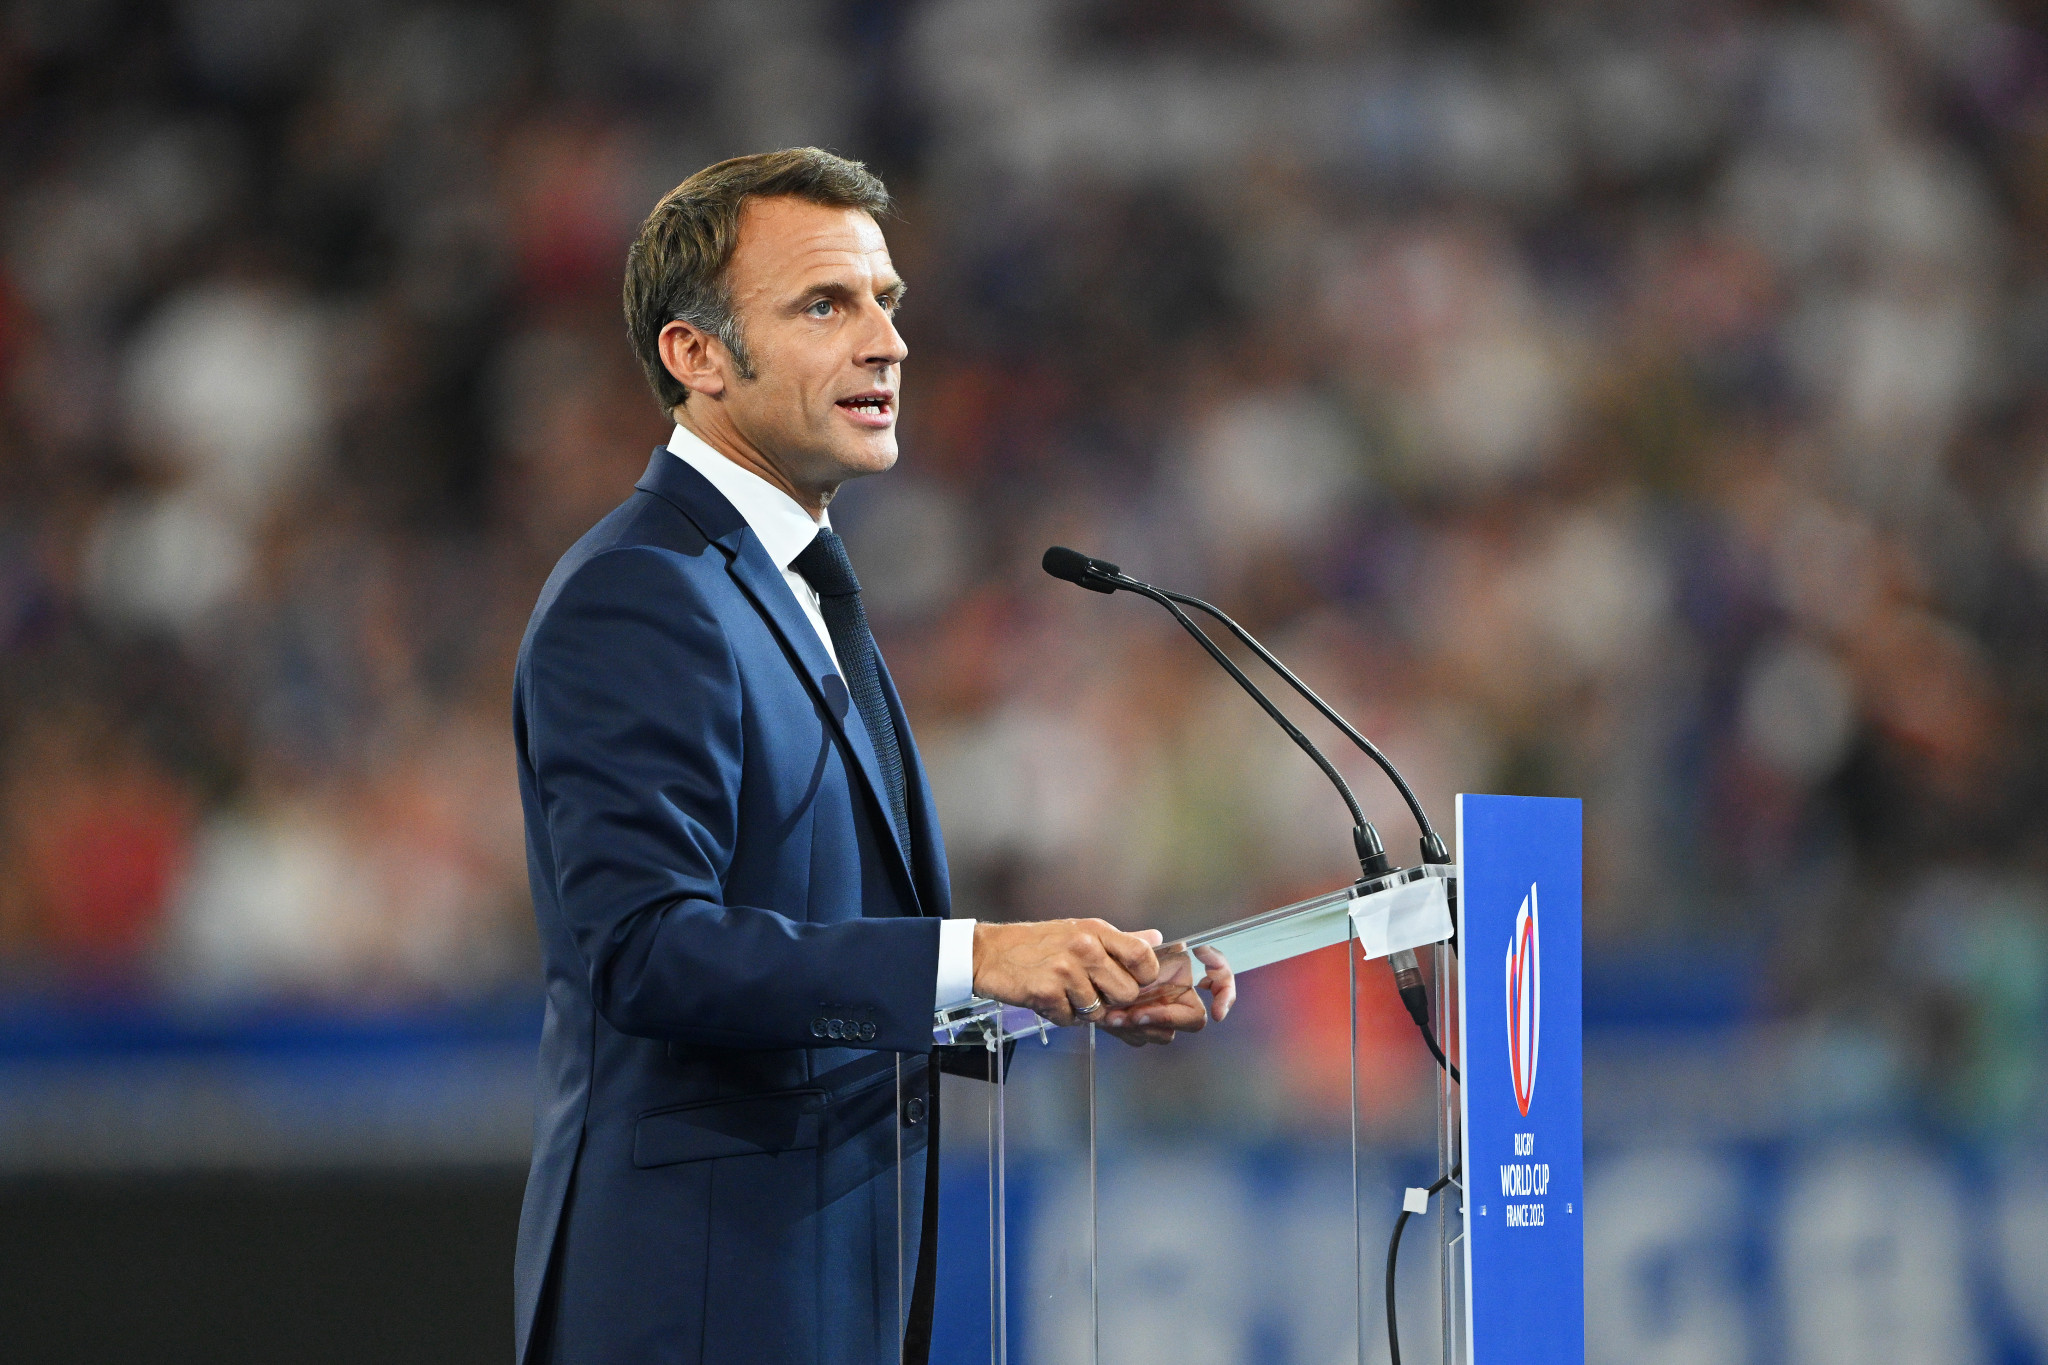 French President Macron booed during Rugby World Cup Opening Ceremony